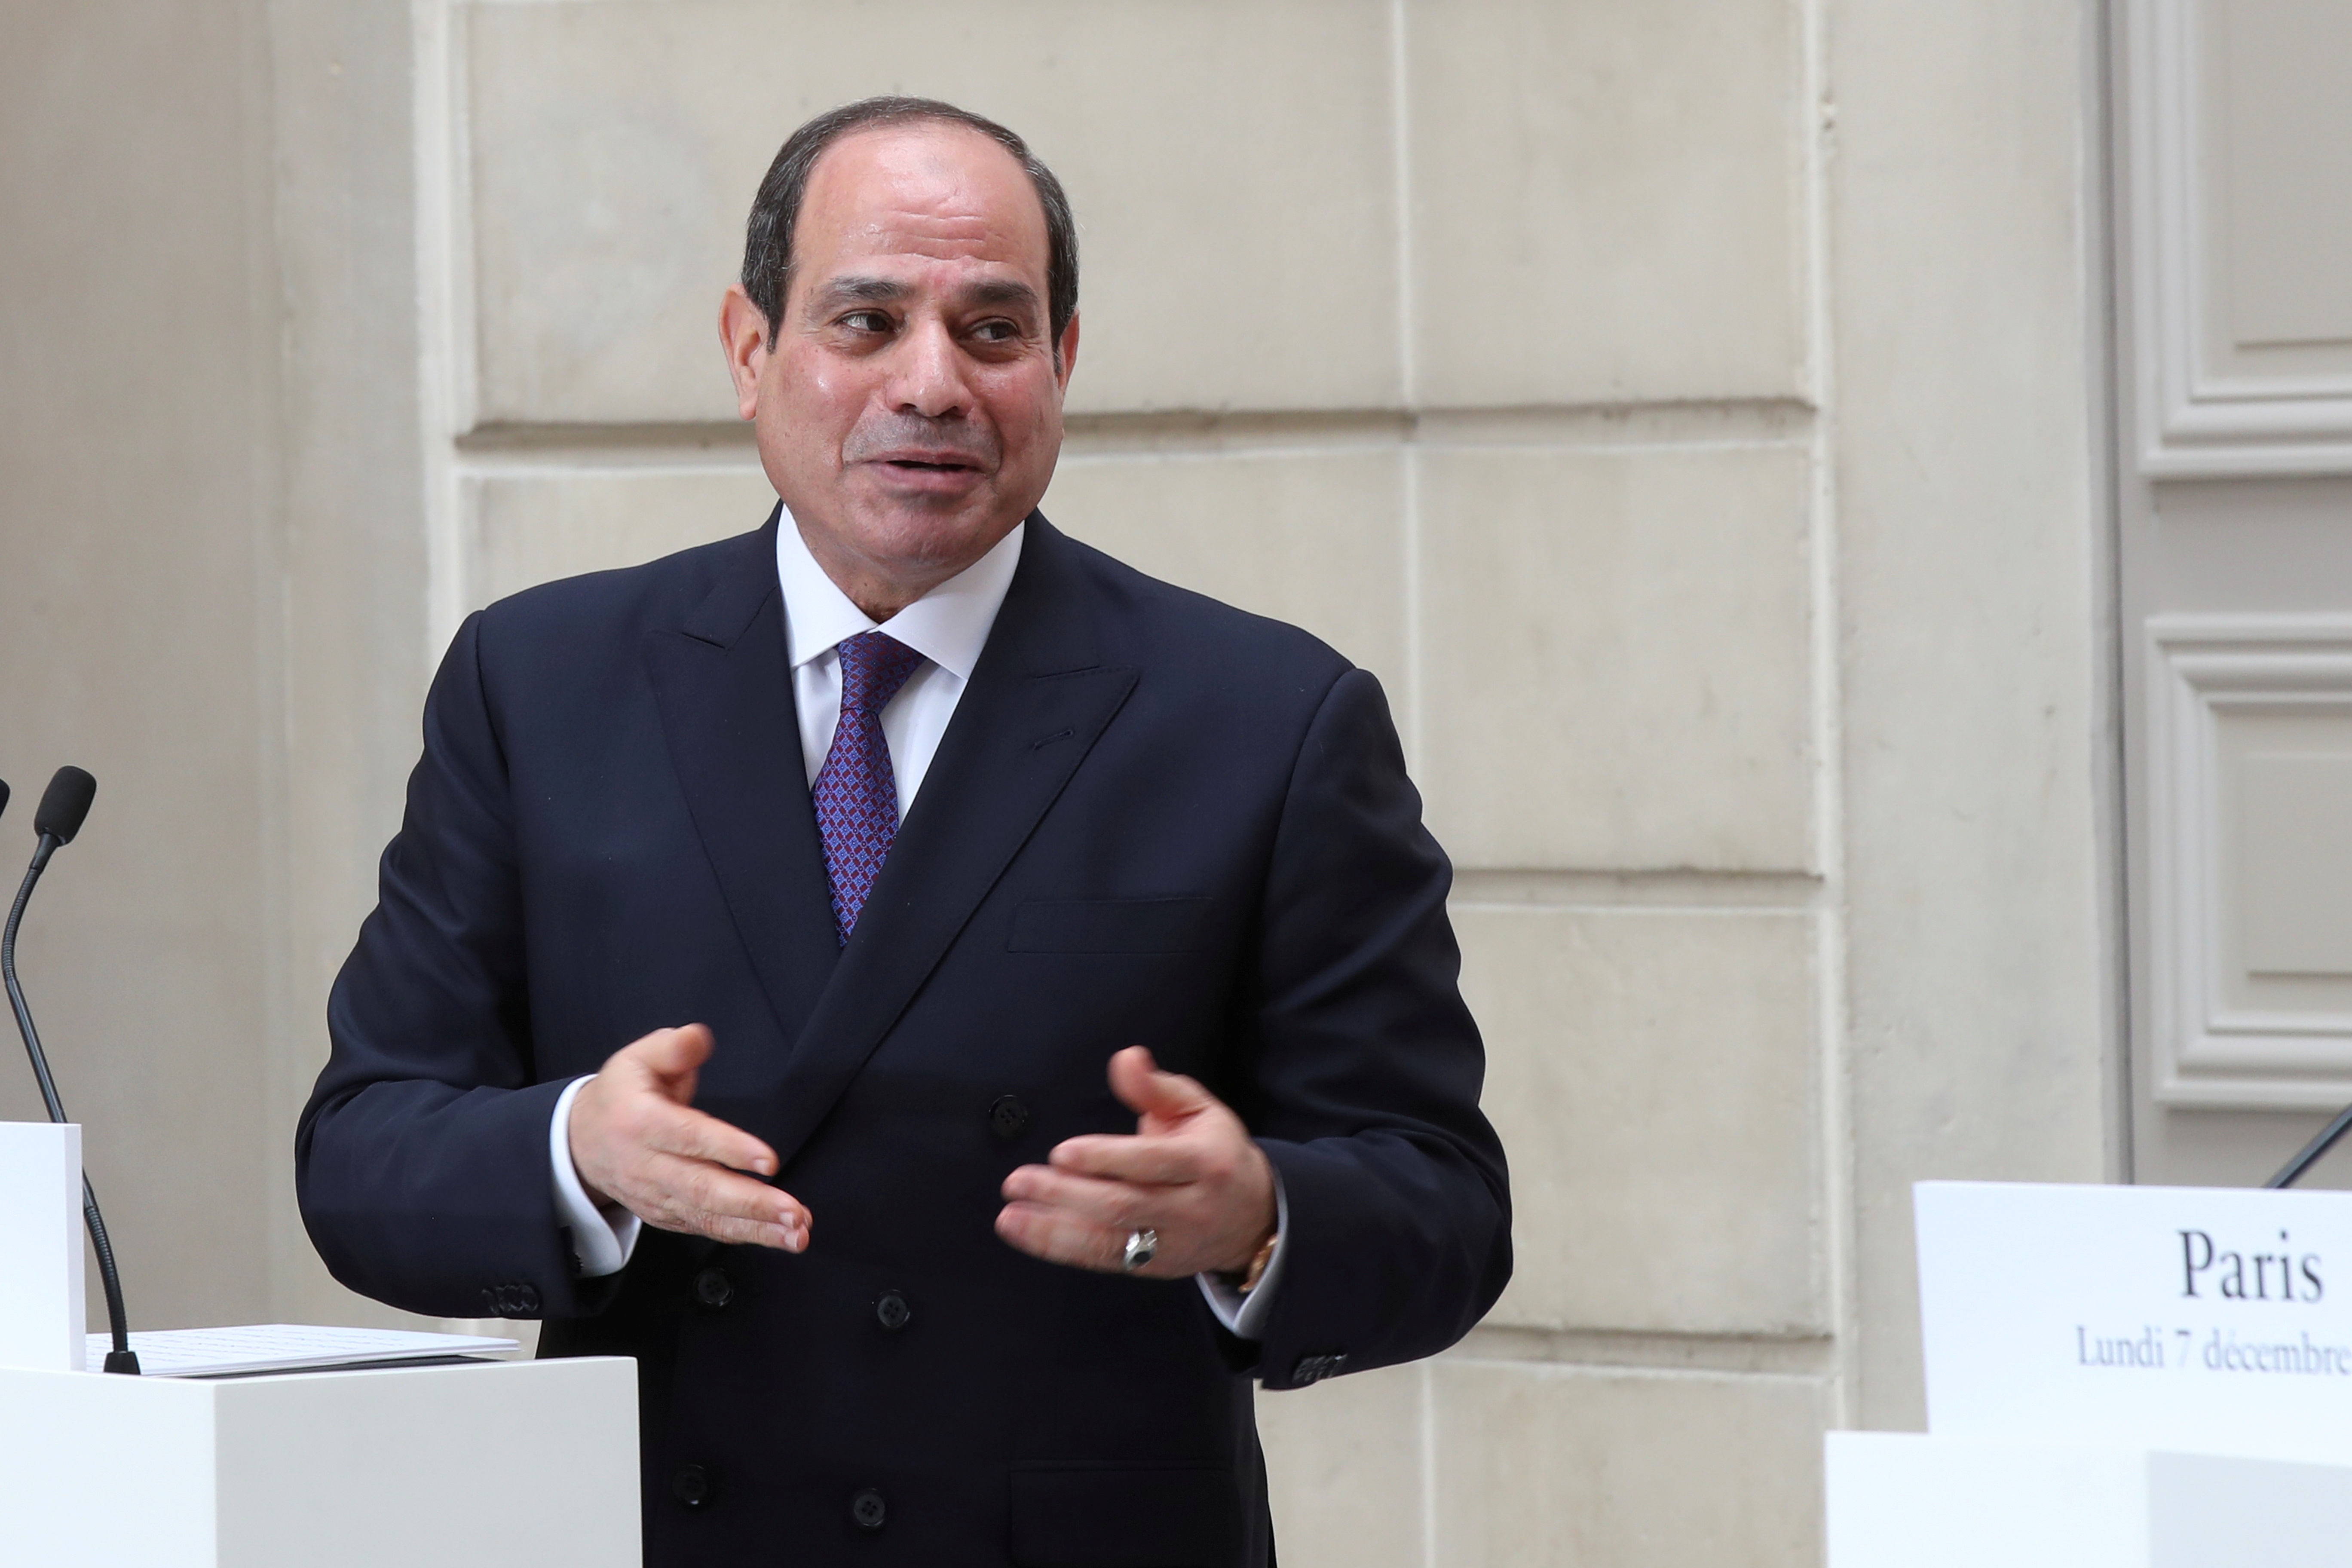 Egyptian President Abdel Fattah al-Sisi speaks during a joint news conference with French President Emmanuel Macron at the Elysee palace, France December 7, 2020. Michel Euler/Pool via REUTERS